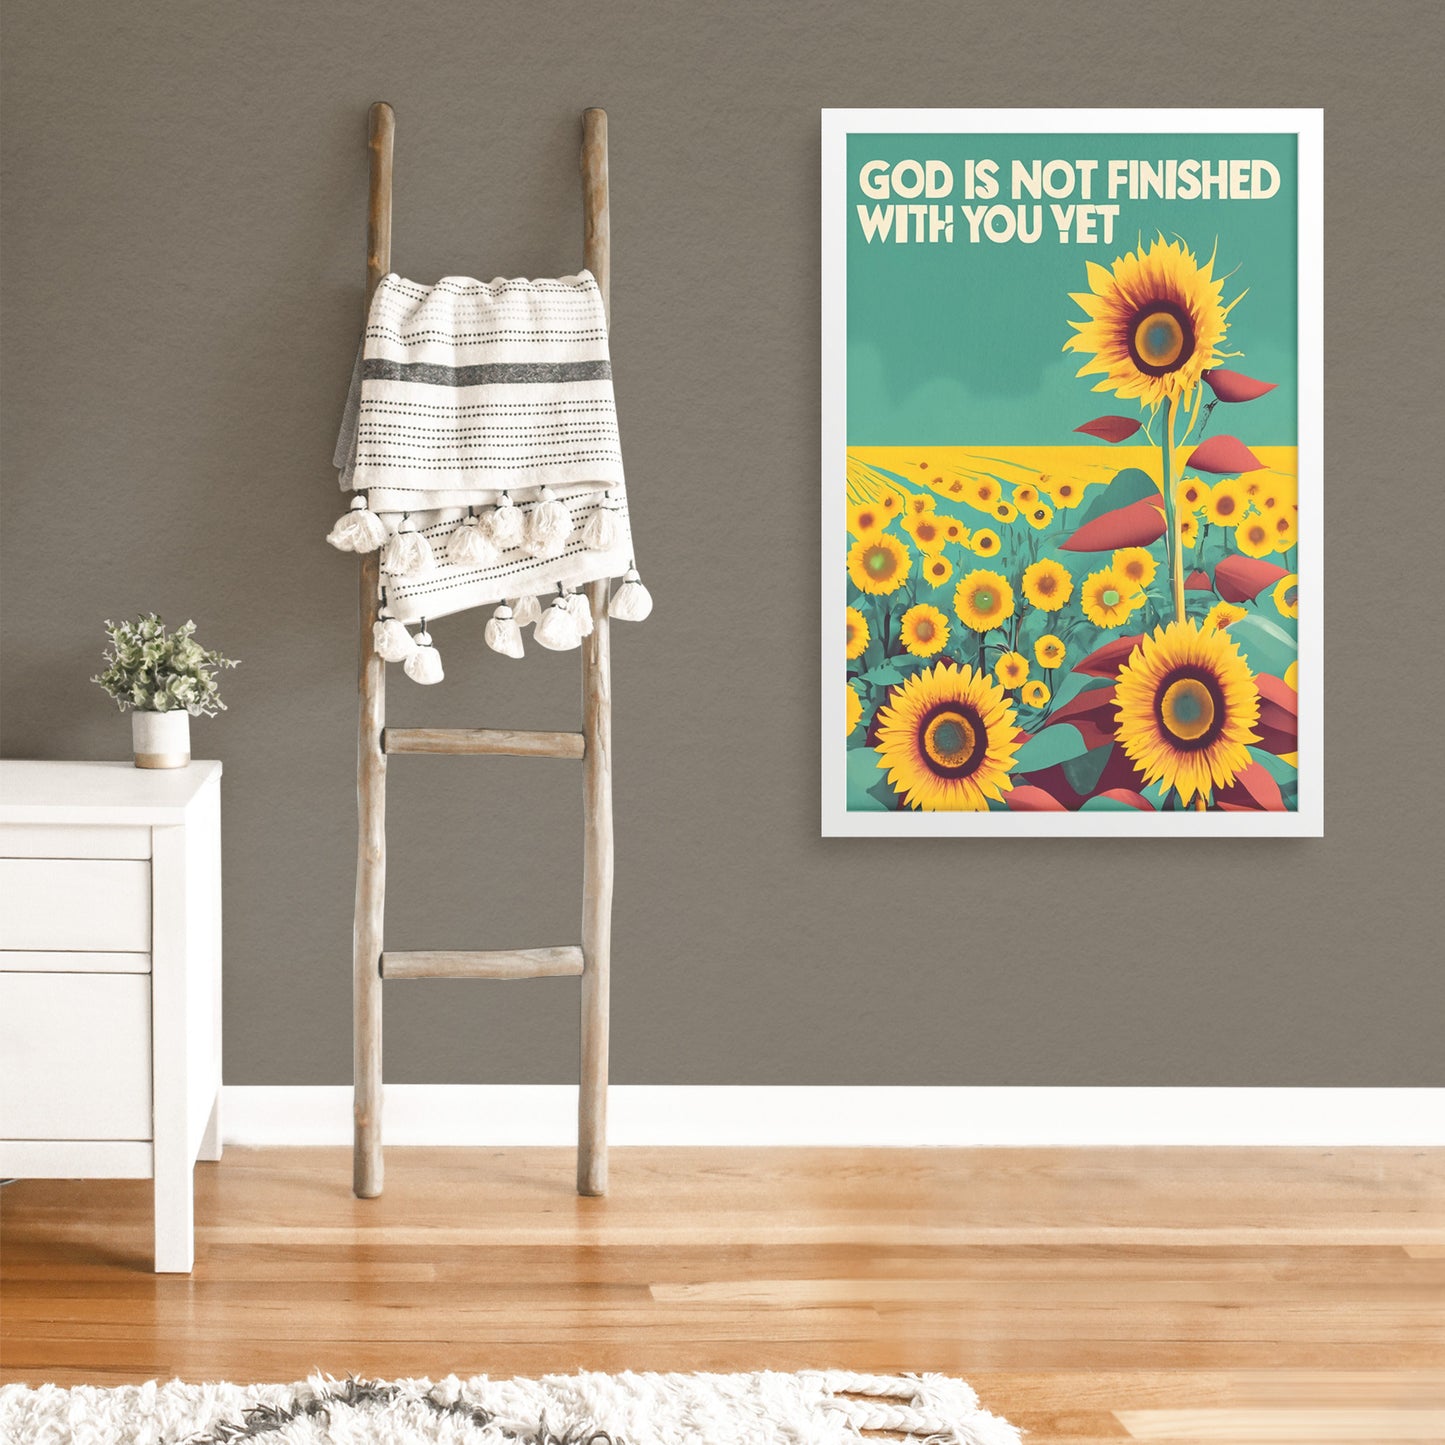 God is Not Finished with You Yet Retro Style Framed Print